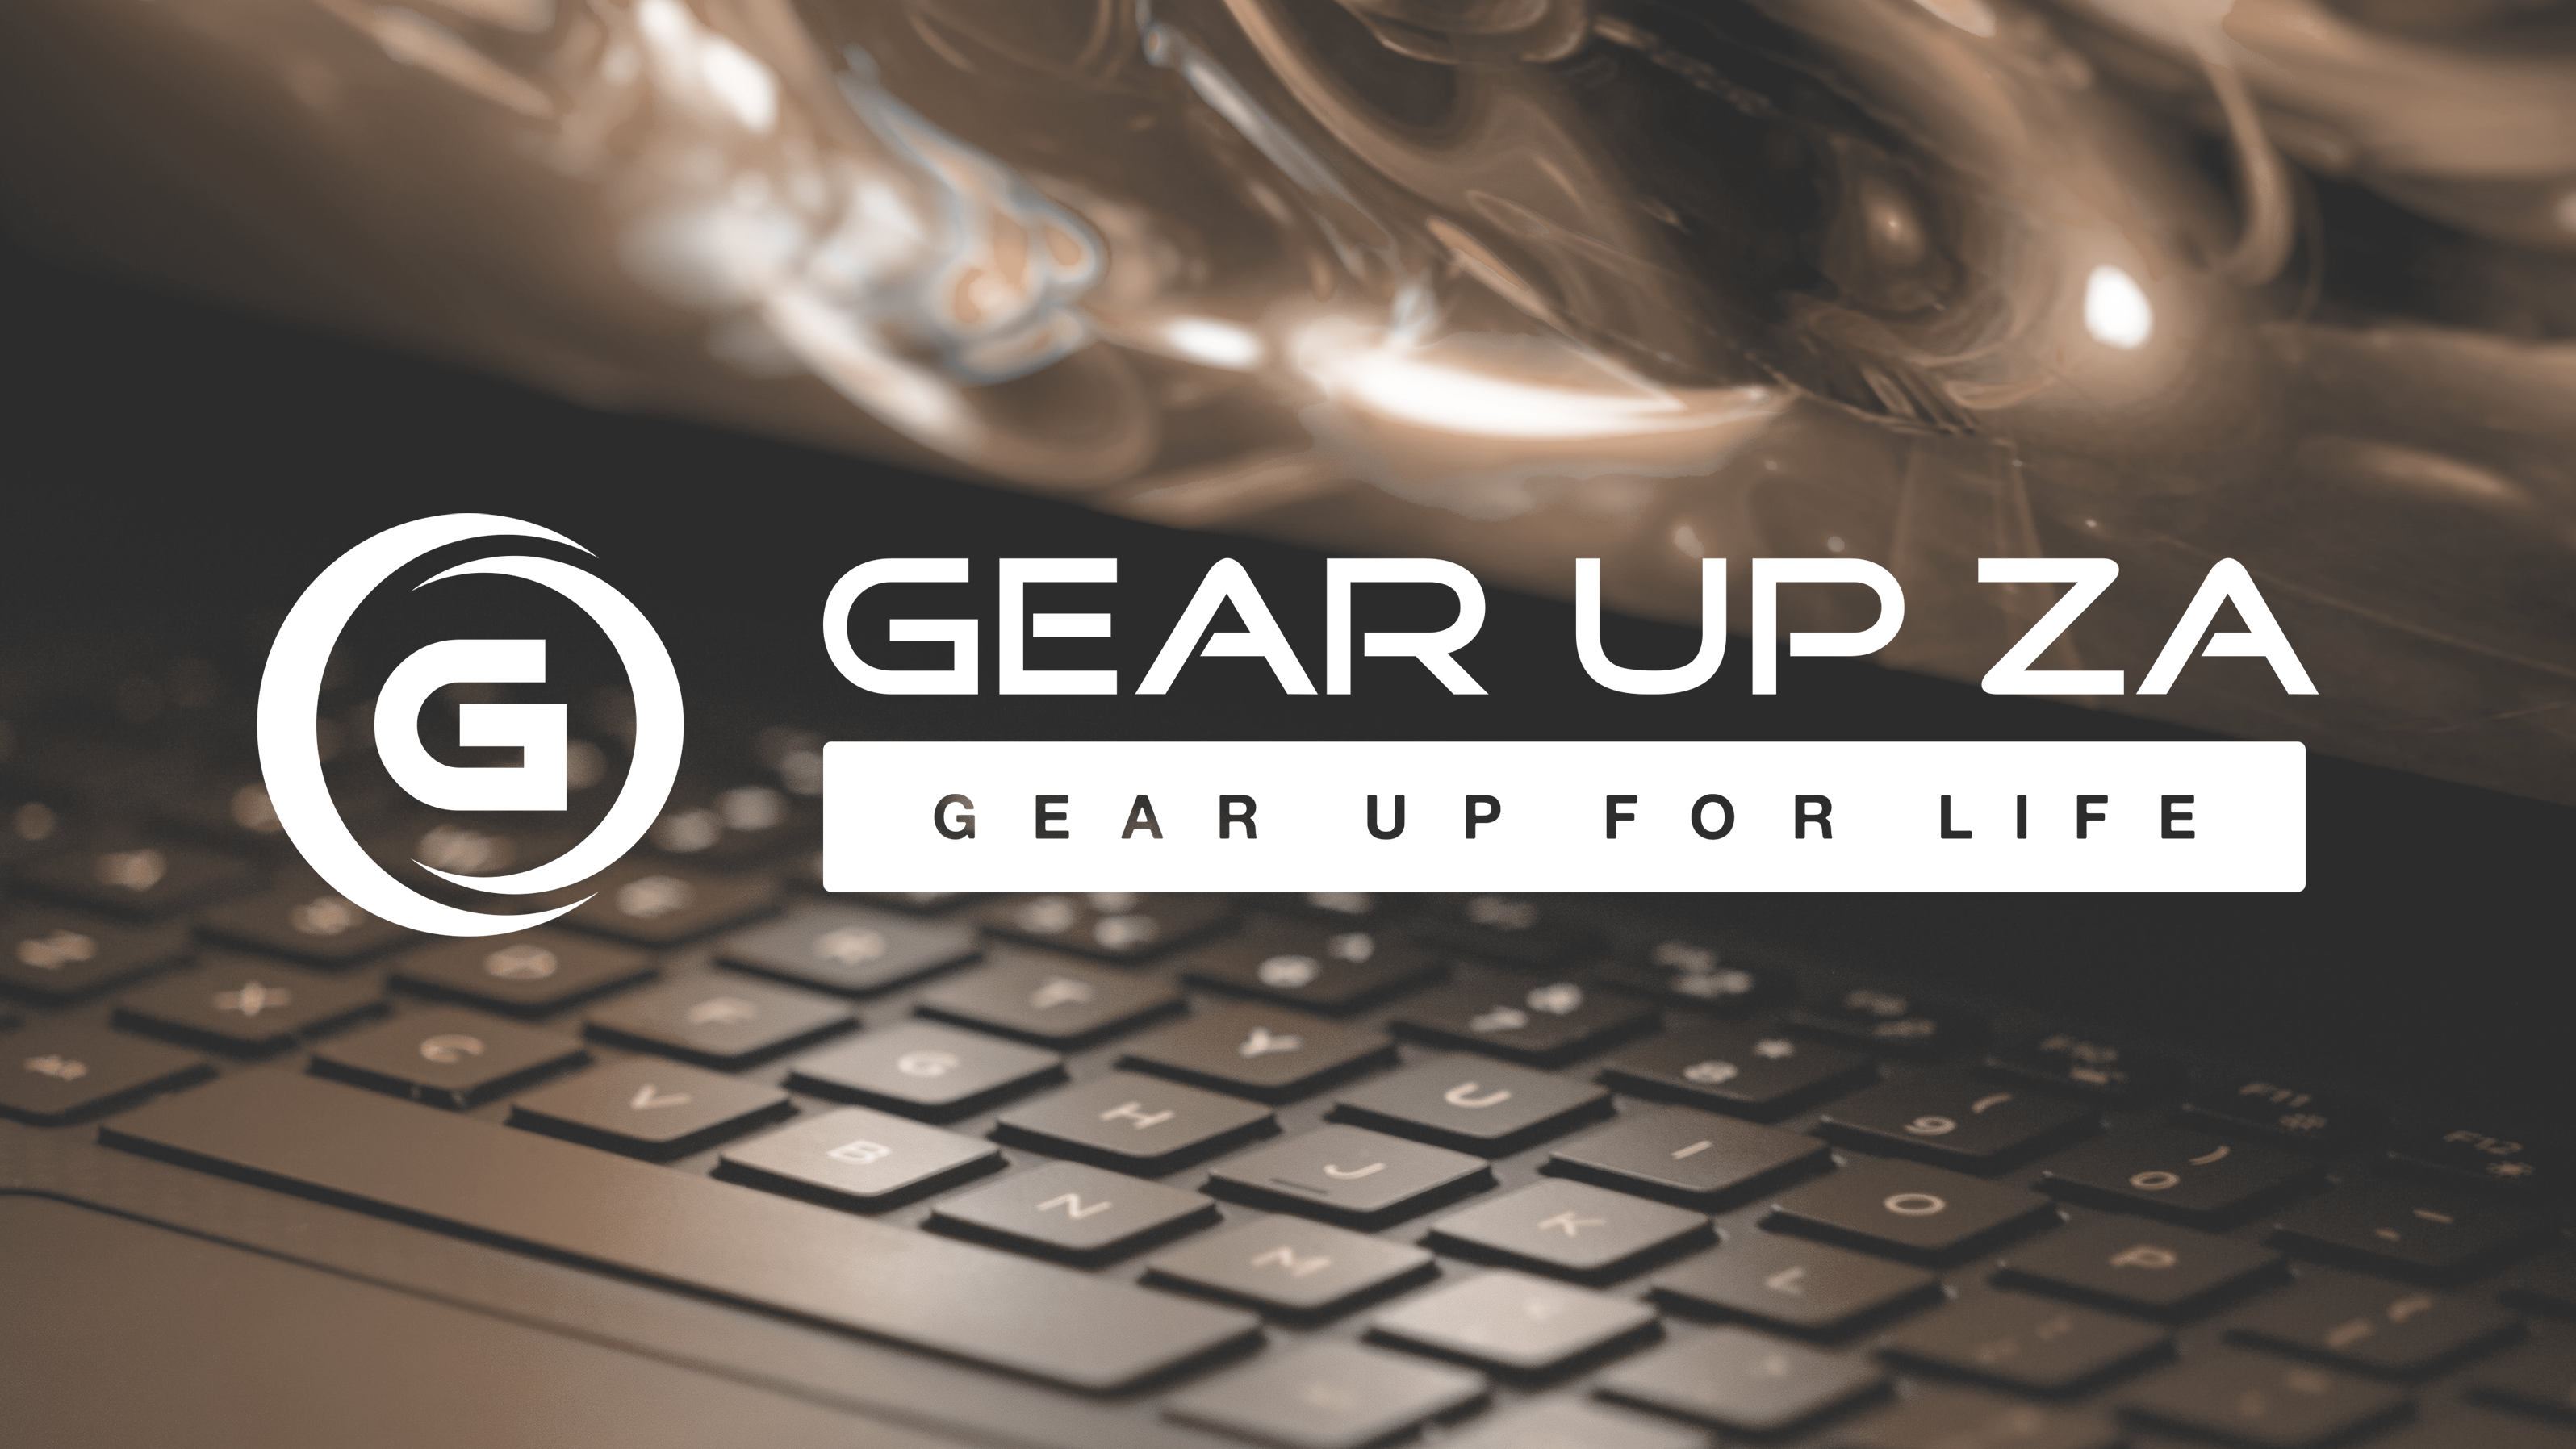 Gear Up ZA - Gear Up For Life!